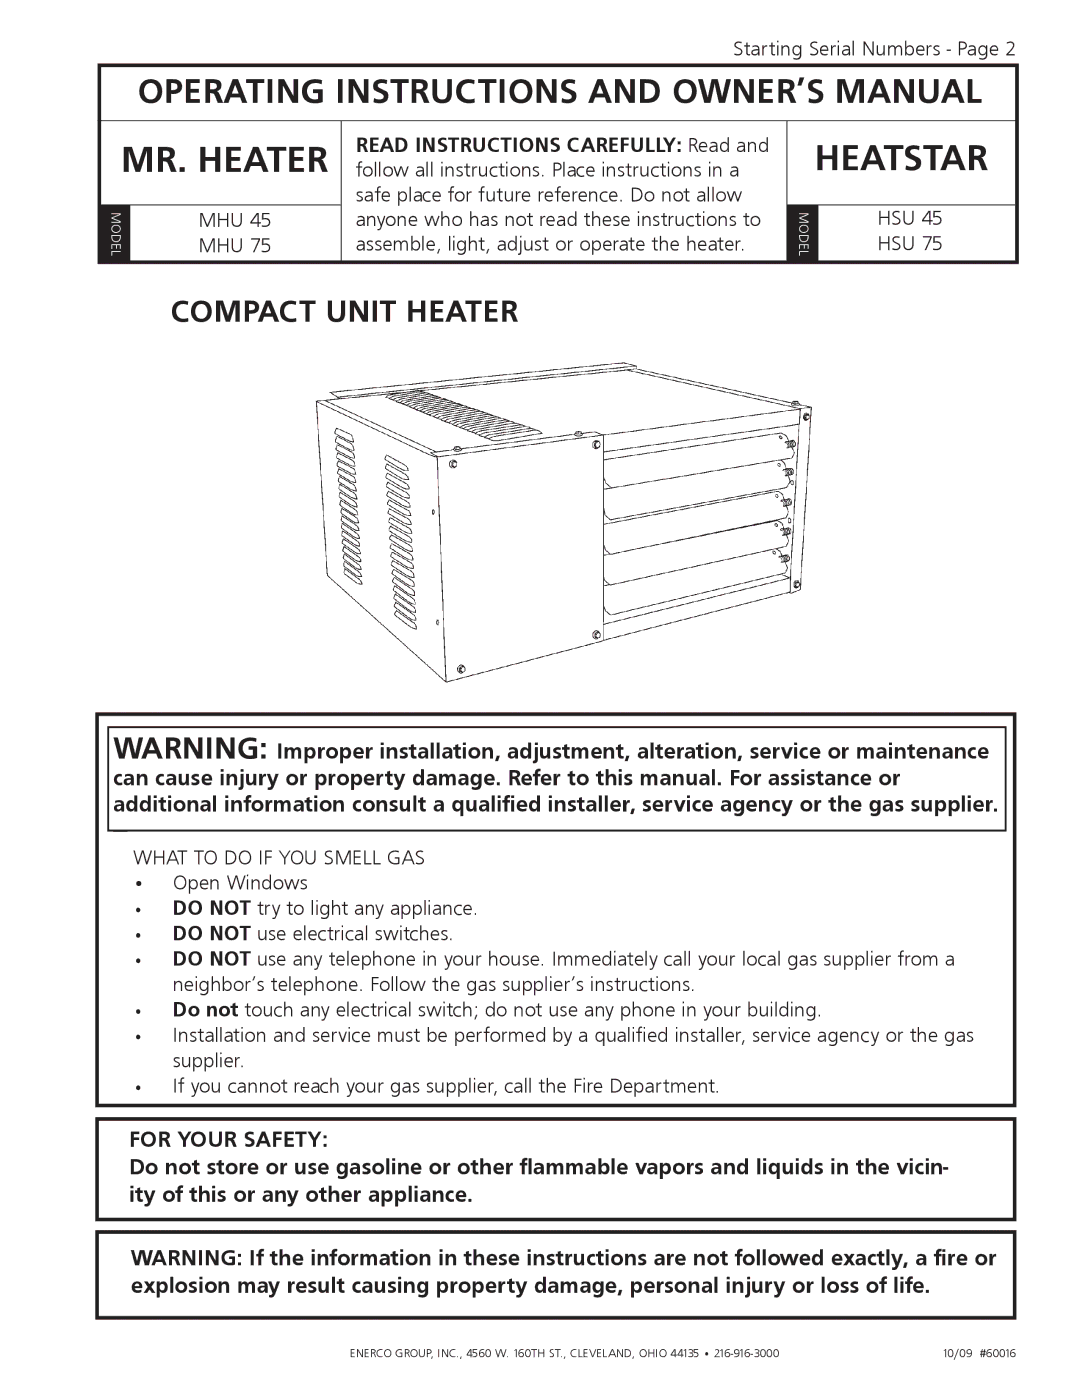 Enerco HSU 45, HSU 75 operating instructions MR. Heater, For Your Safety 